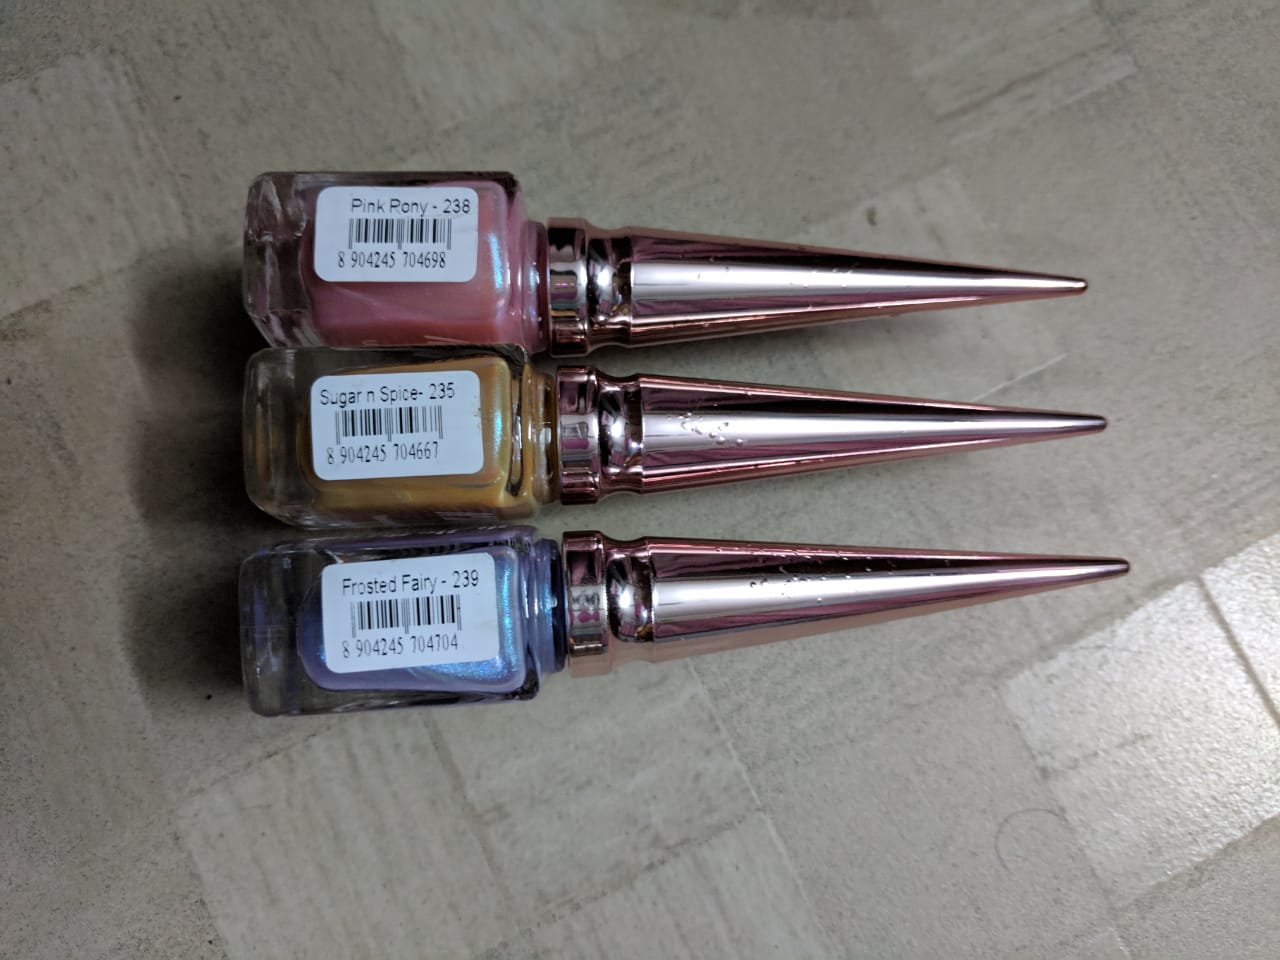 Nykaa Unicorn Potion Nail Enamel Review & Swatches| Frosted fairy, Sugar n spice, Pink peo